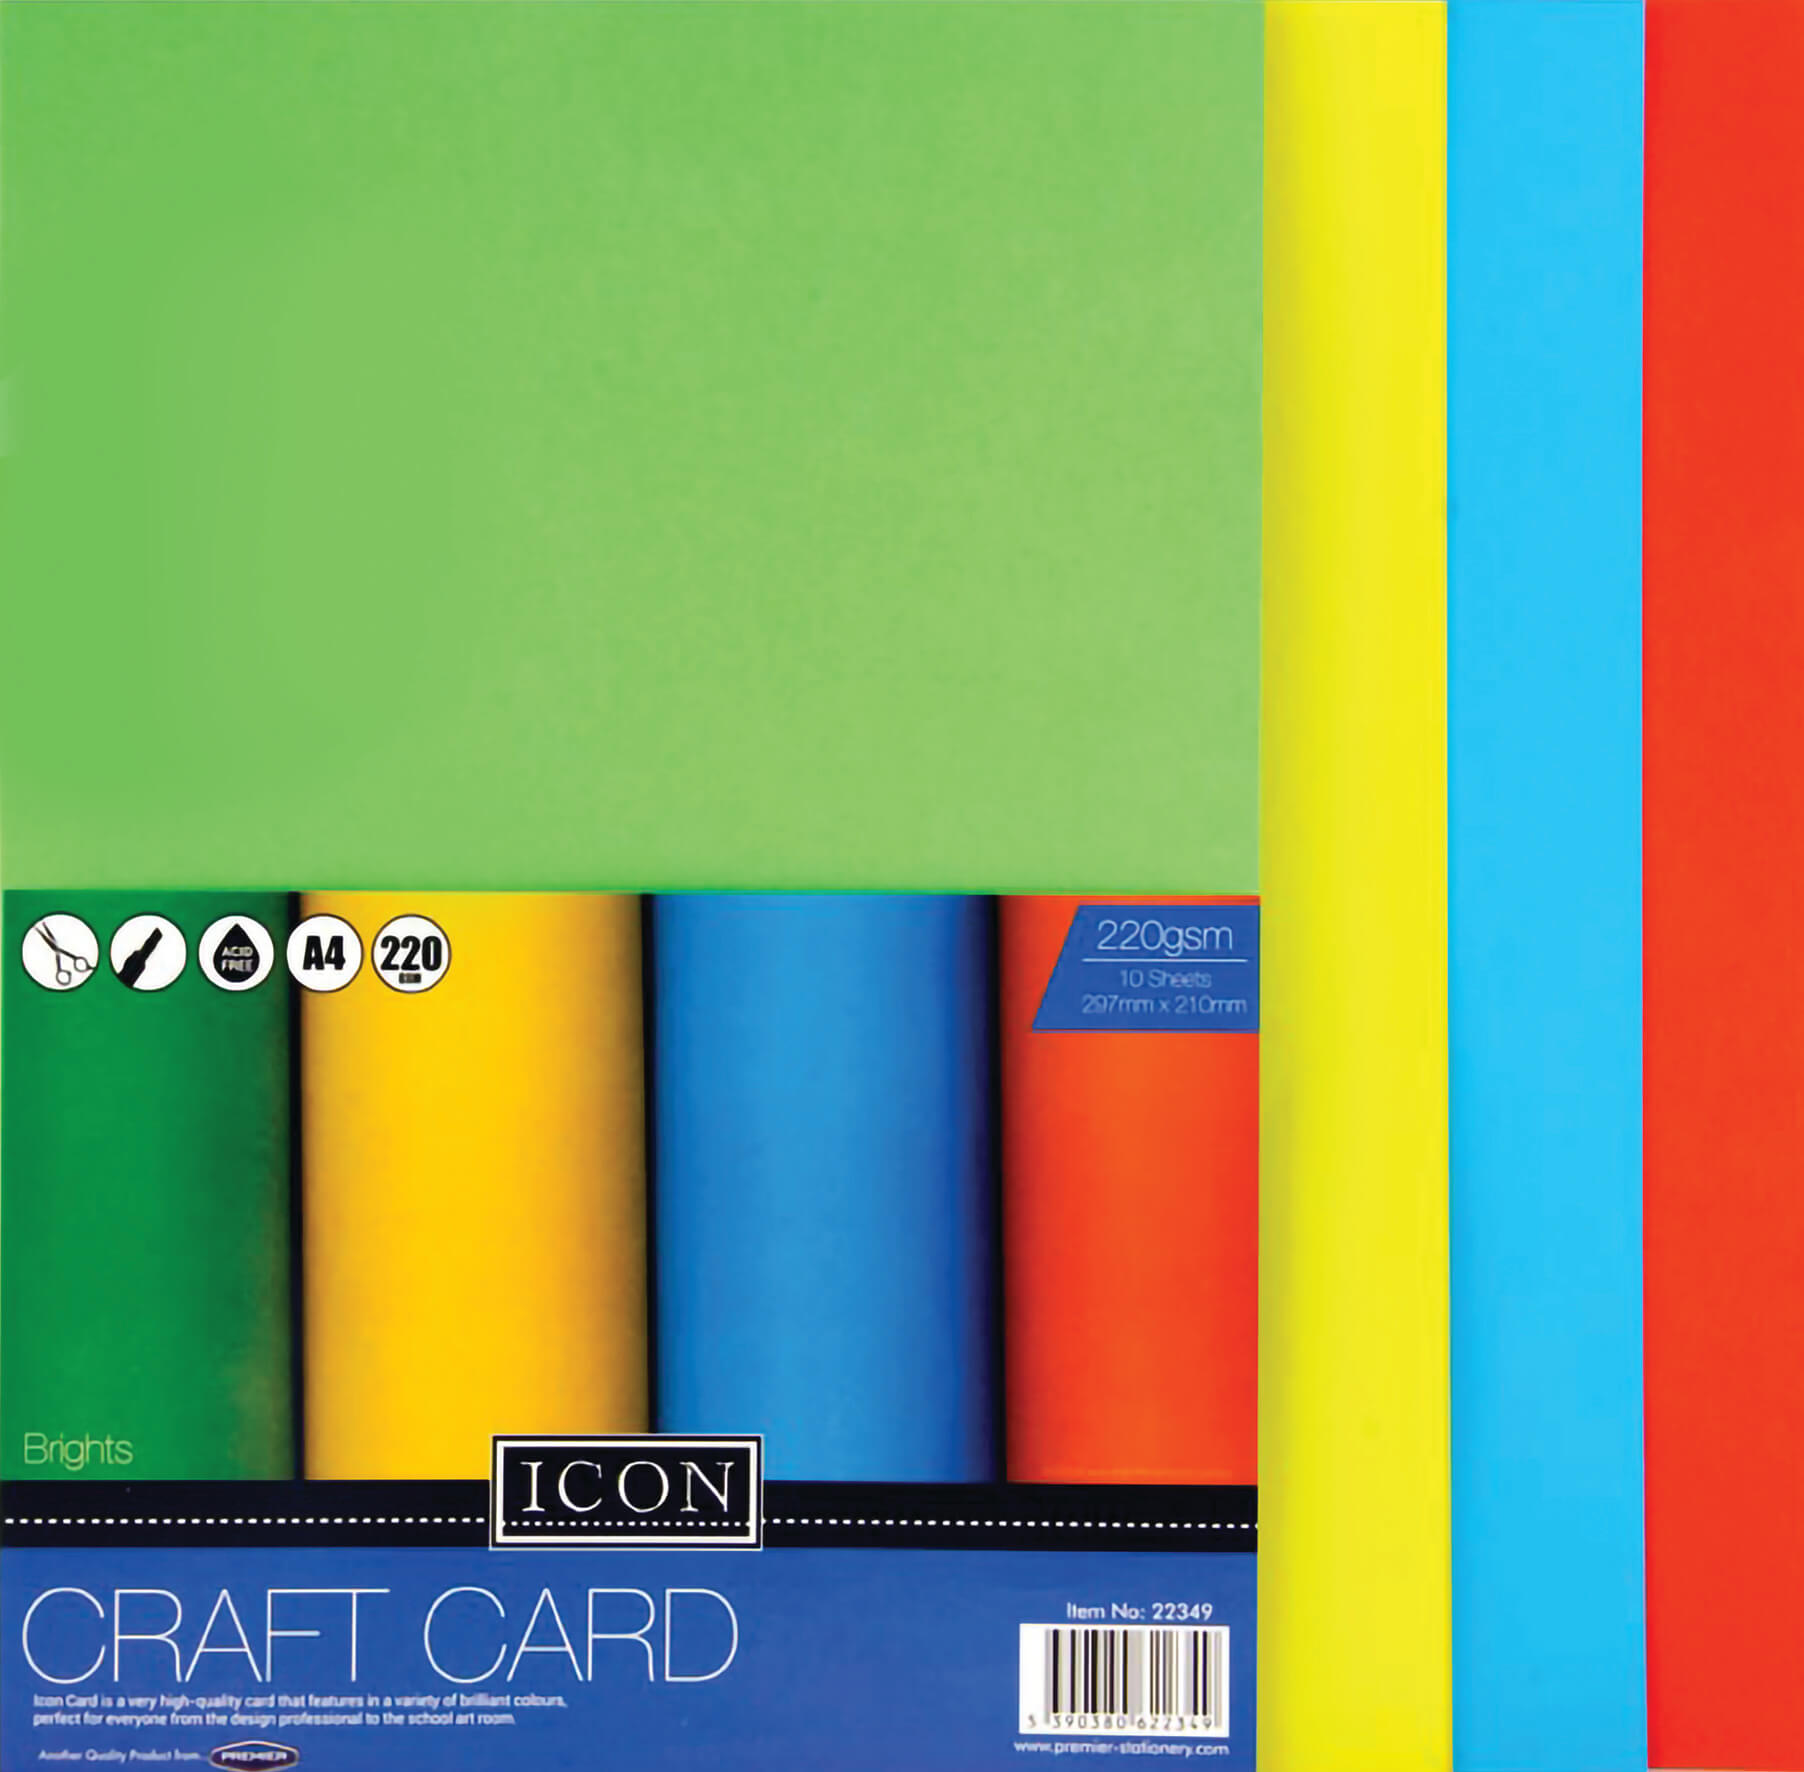 Craft Card Brights A4 220gsm - Pack of 10